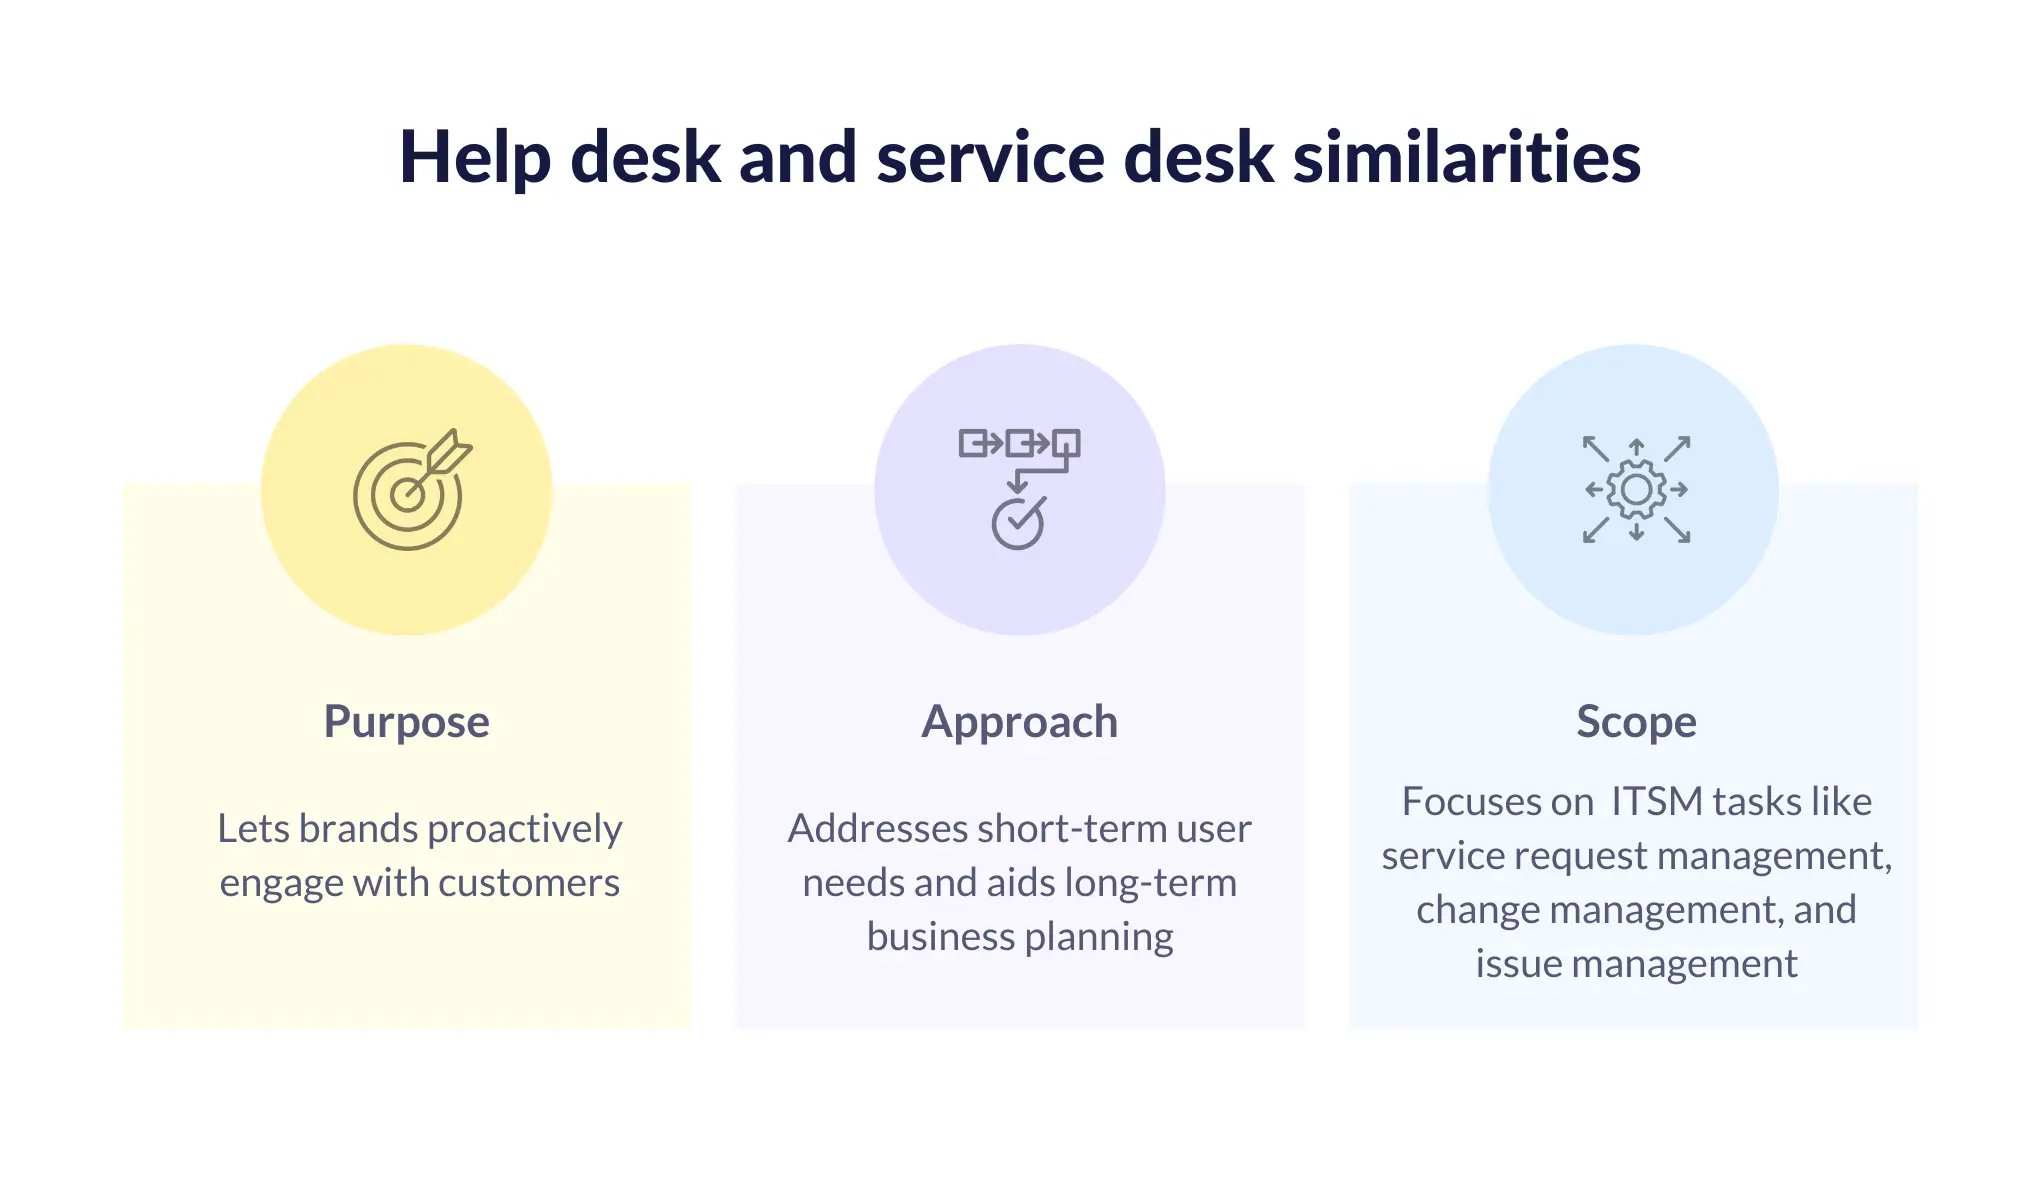 The similarities between a help desk and a service desk